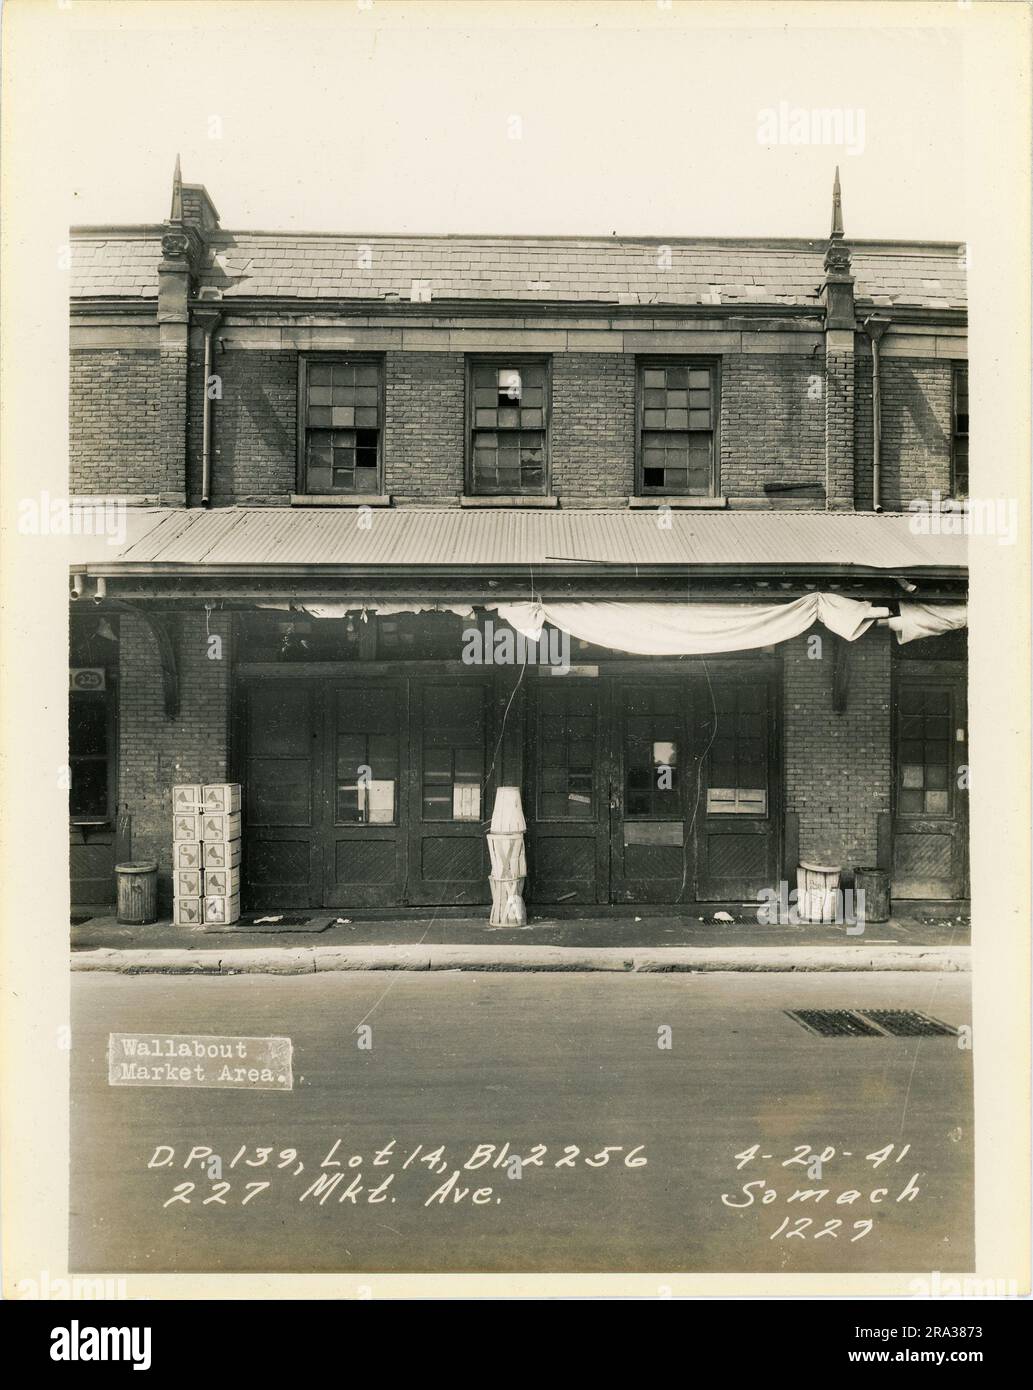 Photograph of exterior of lot 14, Bl. 2256, 227 Mkt. Ave, D.P. 139. Depicts market building exterior with sign for J. Zaimoff.. Stock Photo